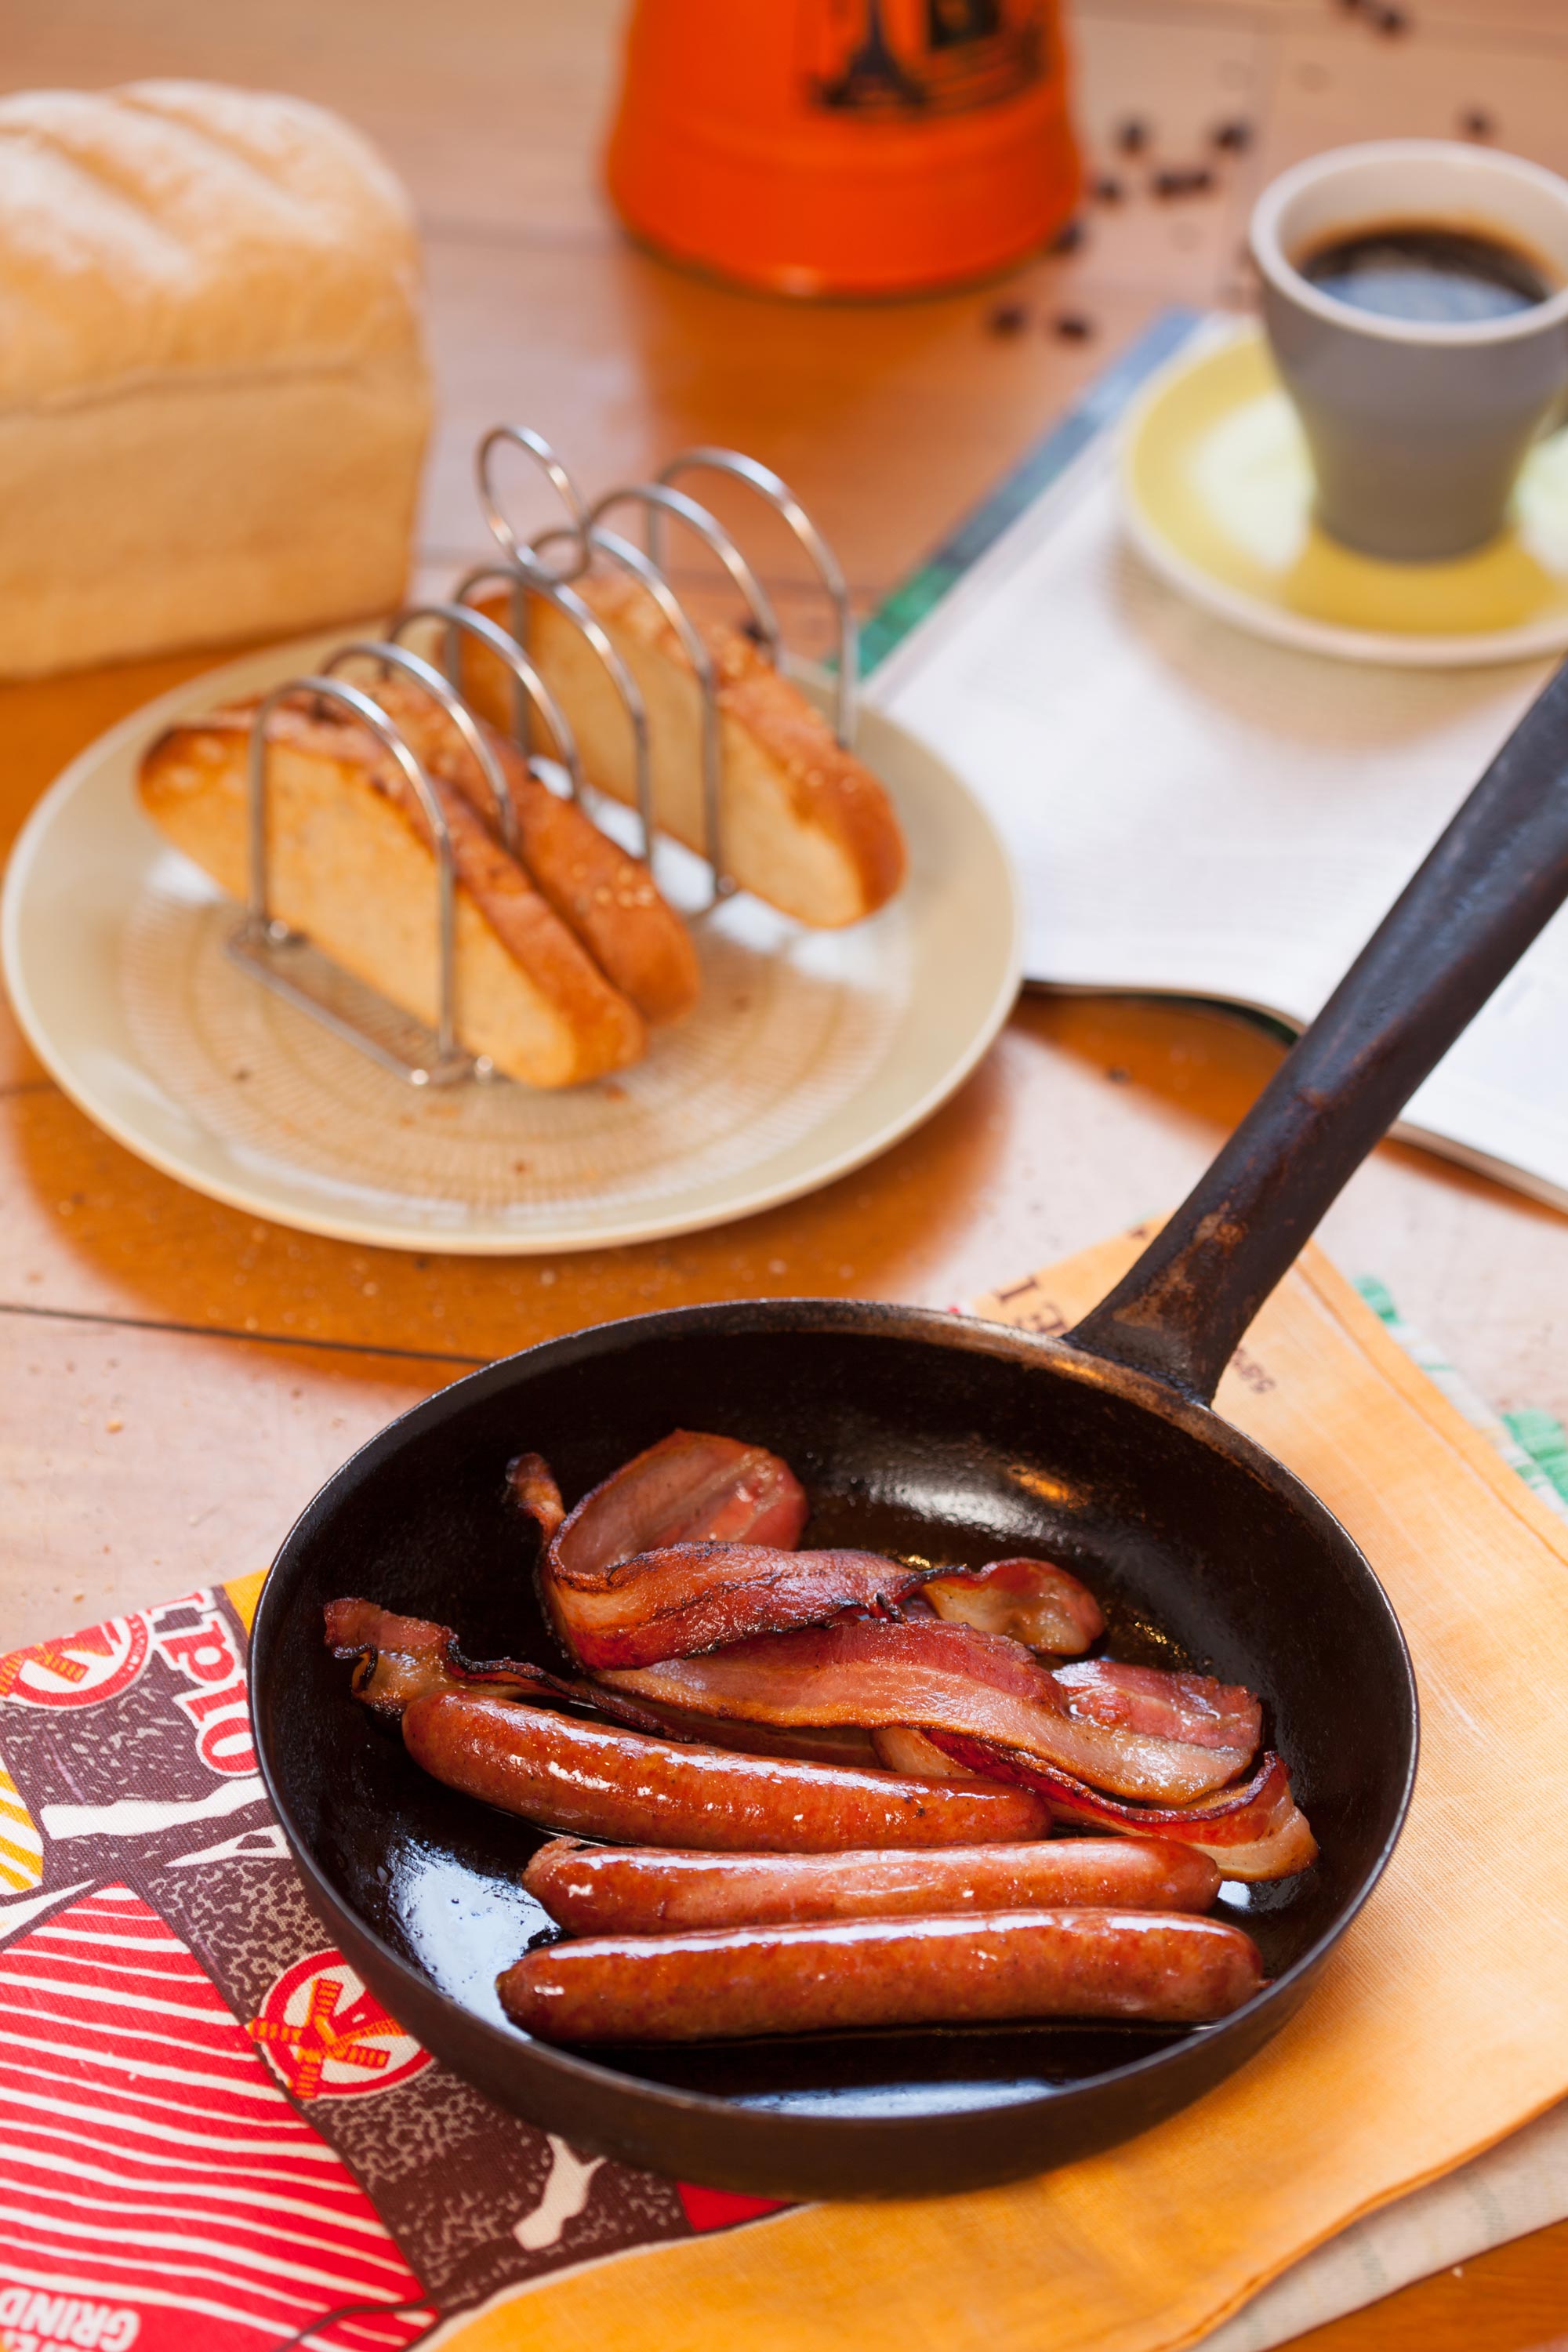 Bacon and sausages on a dish with condiments